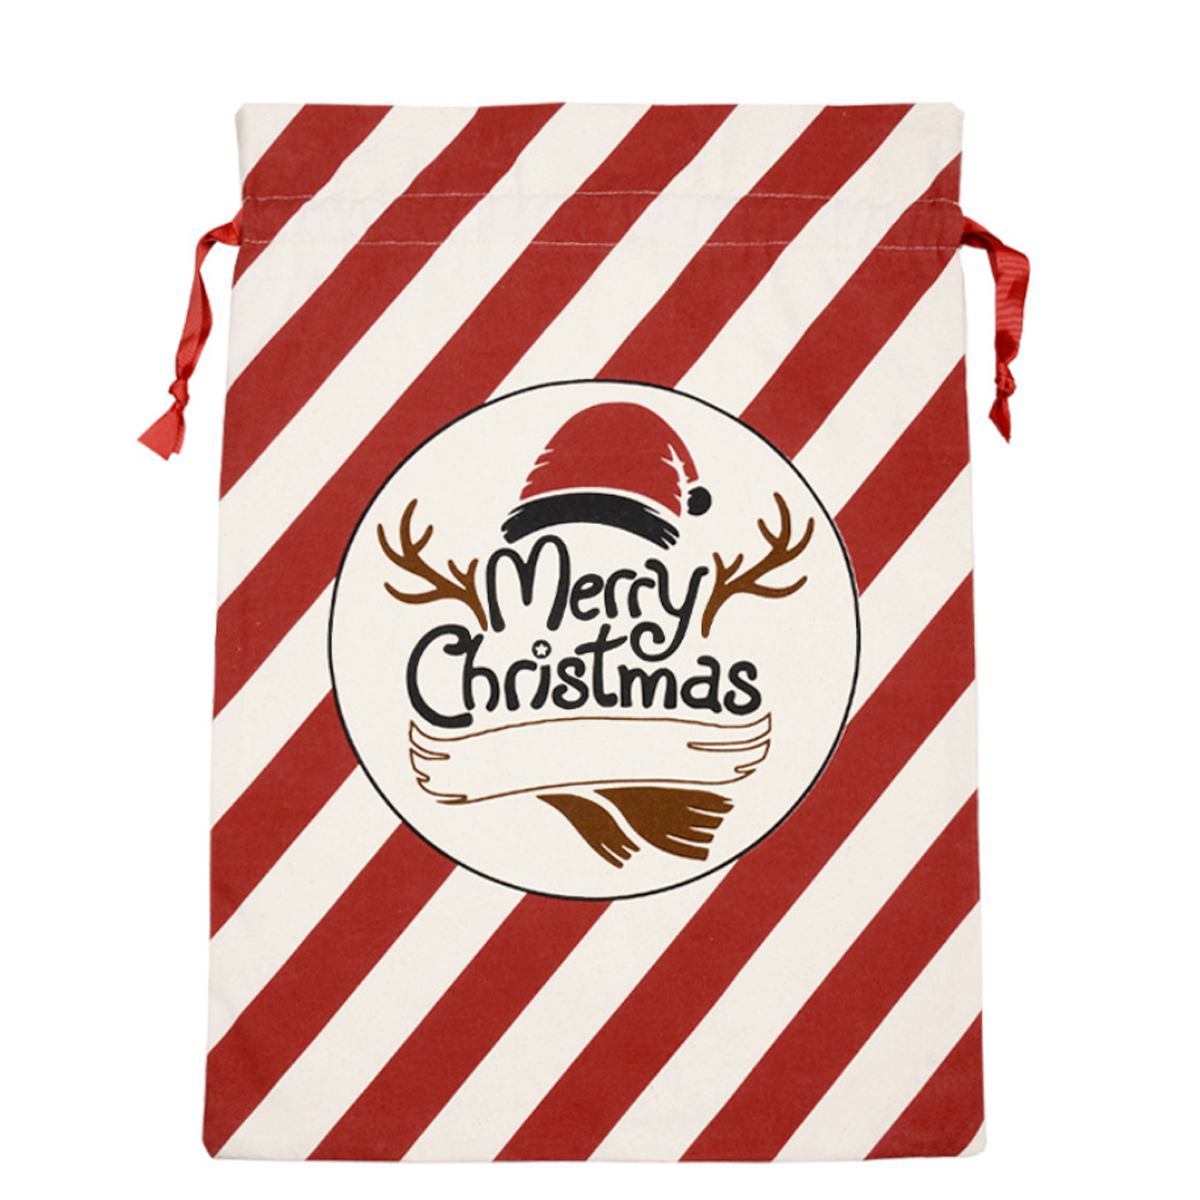 Santa-Sack-Canvas-Bag-Party-Christmas-Candy-Bags-Xmas-Decorations-for-Kids-Gift-1589089-7